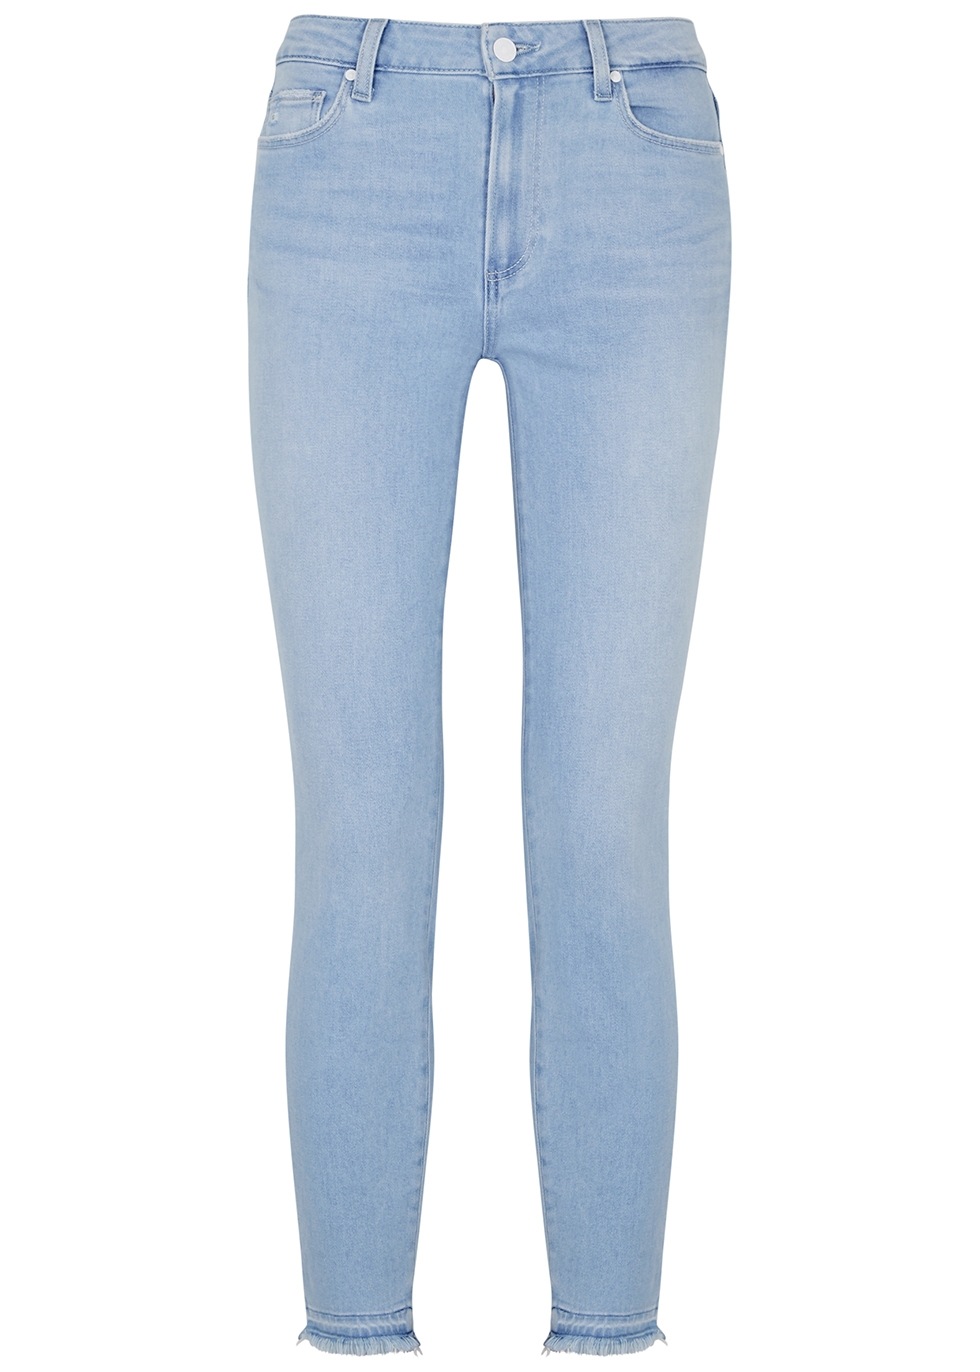 Paige Hoxton Ankle light blue skinny jeans